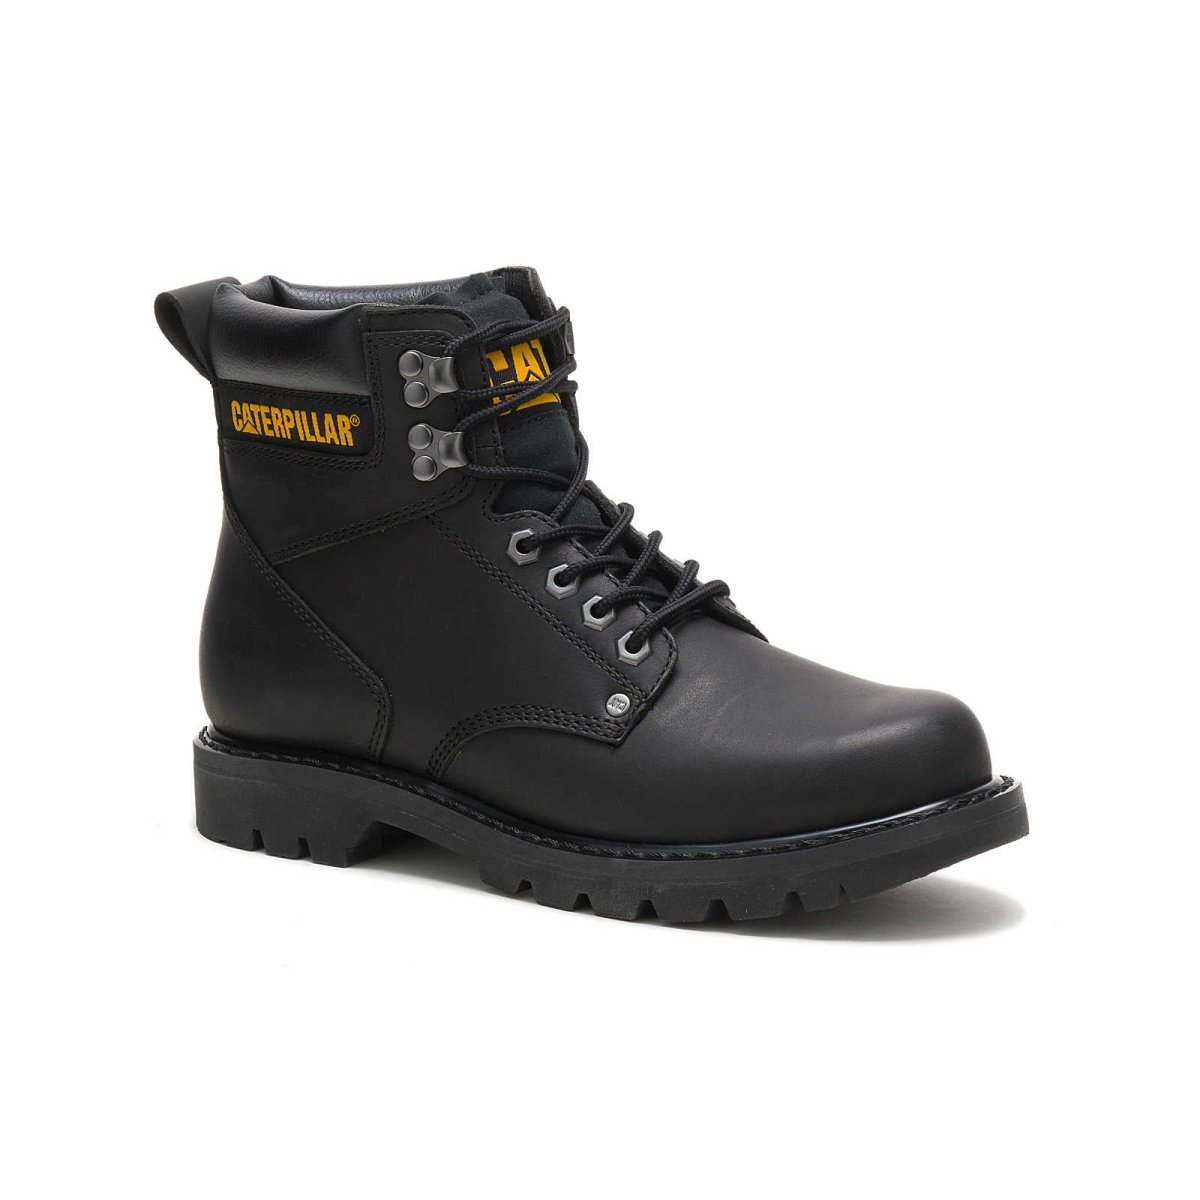 CATERPILLAR SECOND SHIFT MEN'S WORK BOOT (P70043) IN BLACK - TLW Shoes